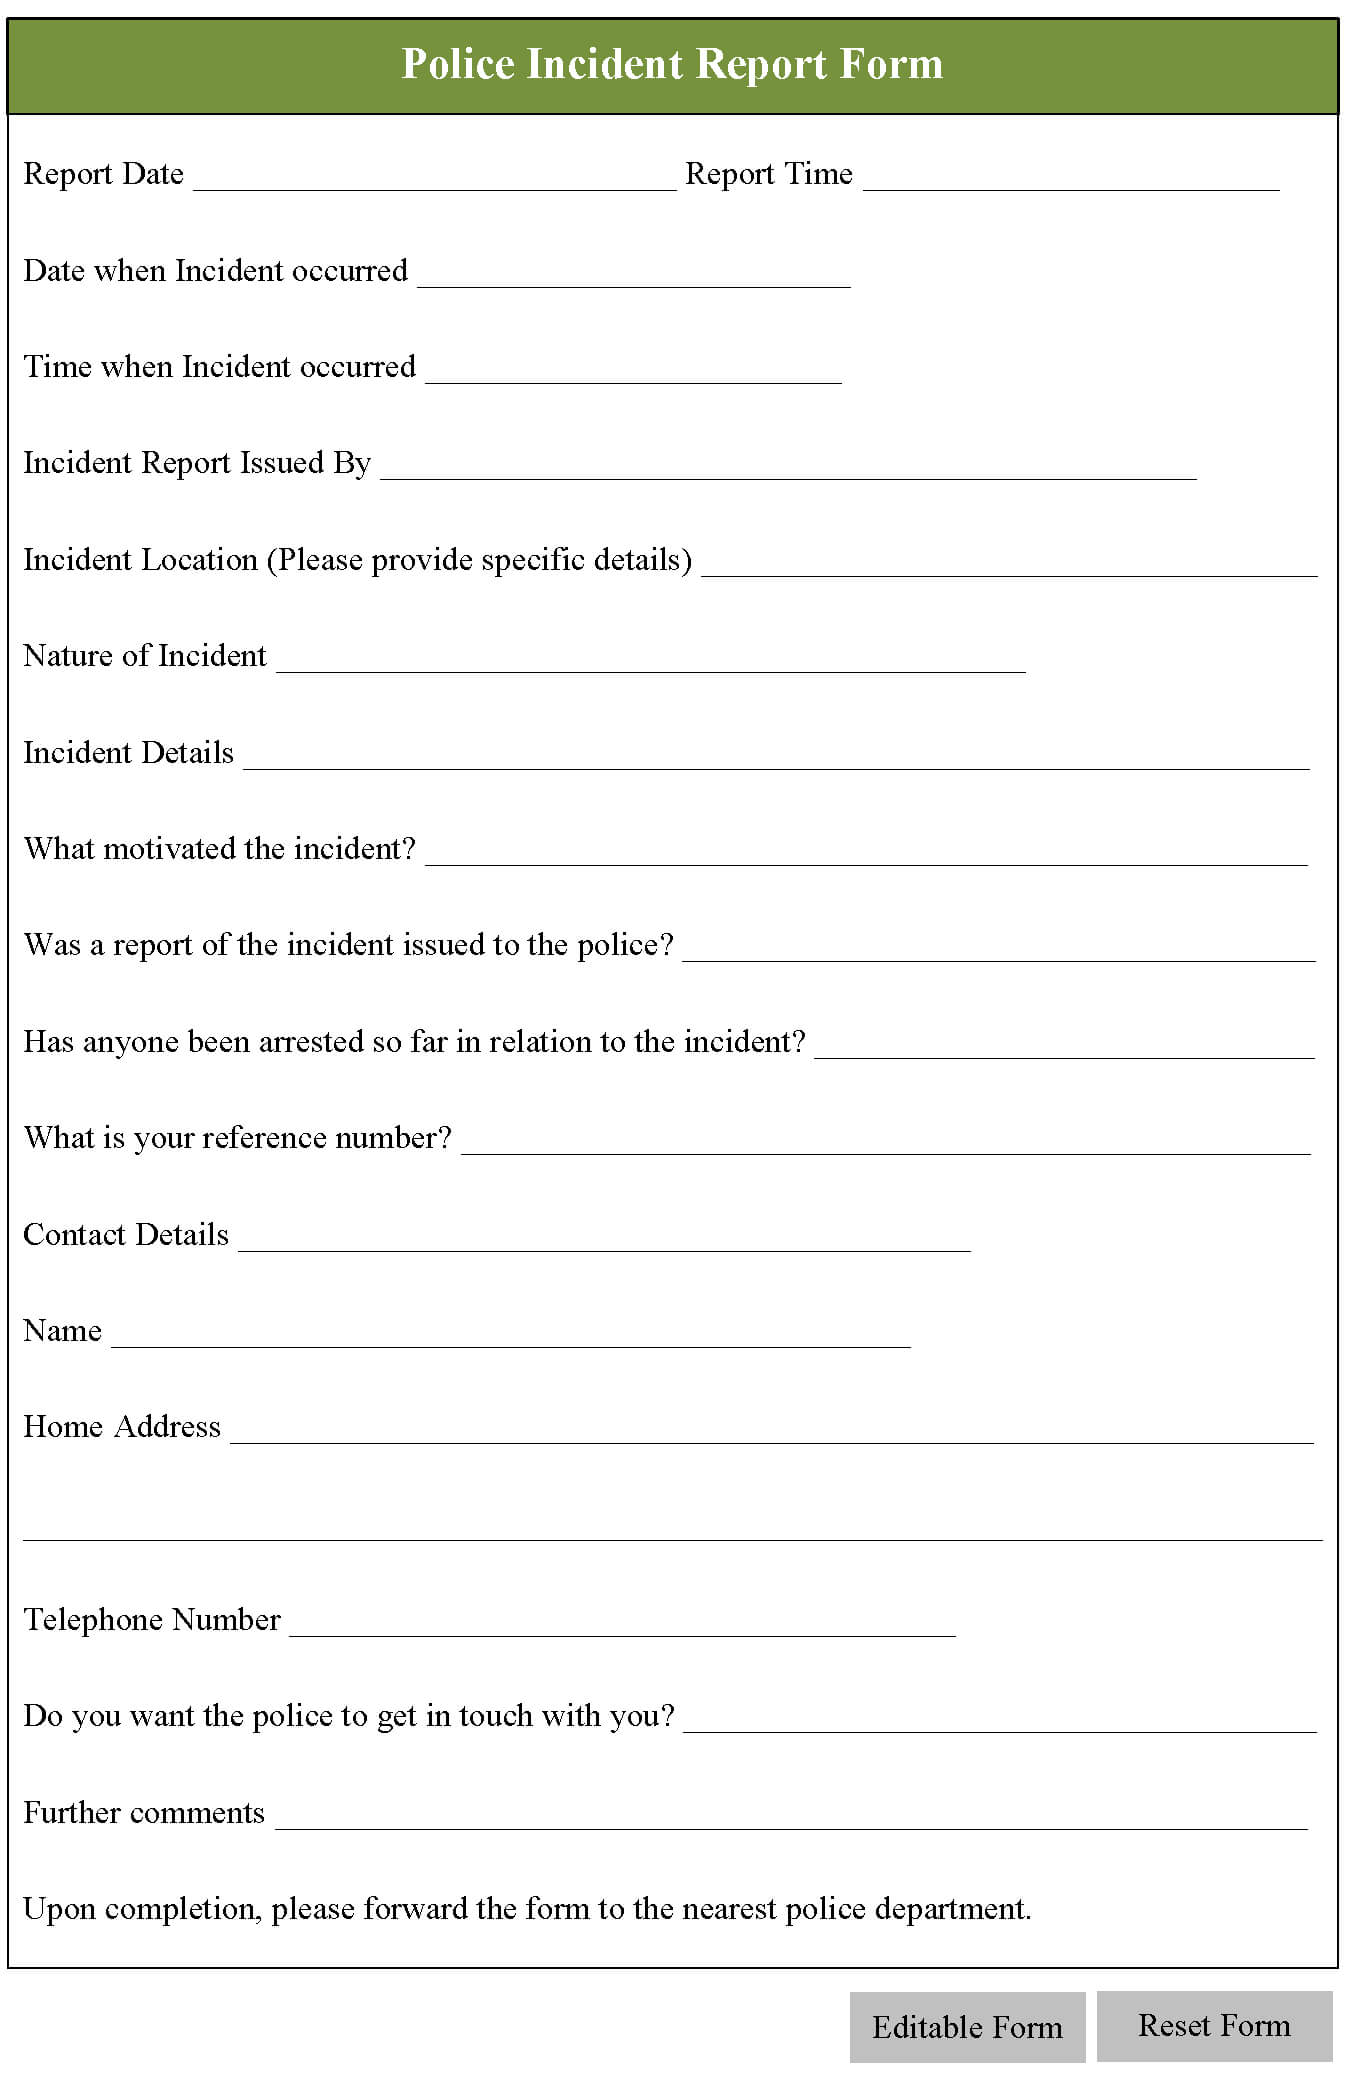 Incident Report Template Nz ] – Incident Accident Report With Regard To Police Incident Report Template